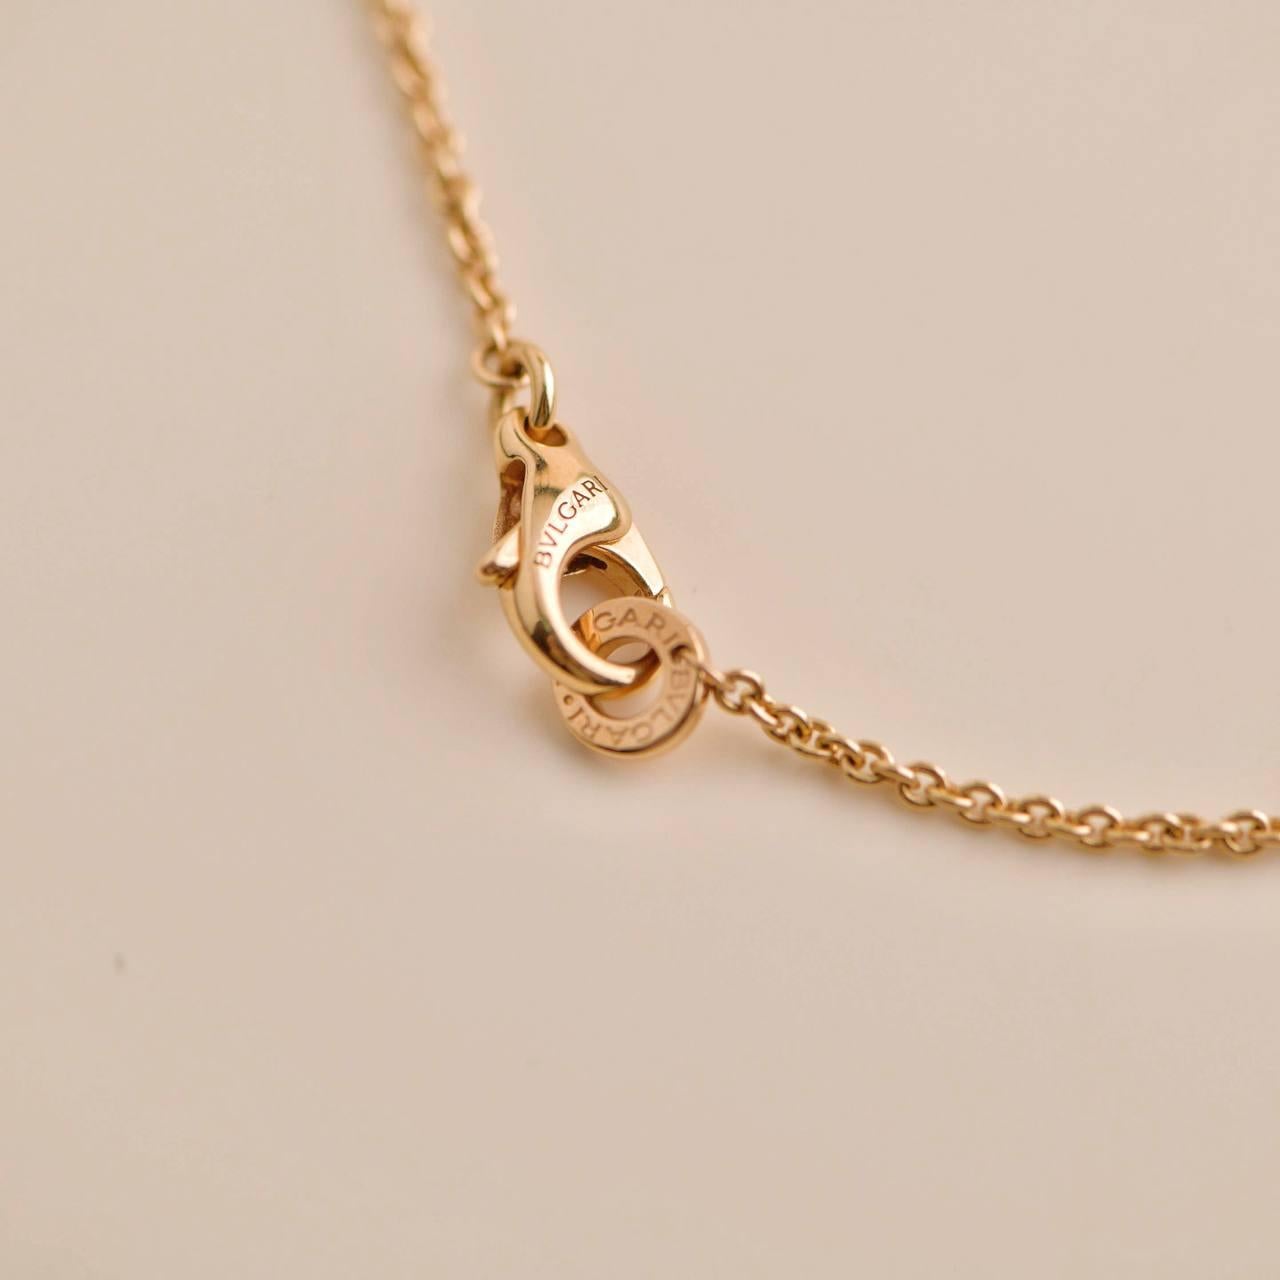 BVLGARI B.ZERO1 Necklace In 18k Yellow Gold For Sale 1